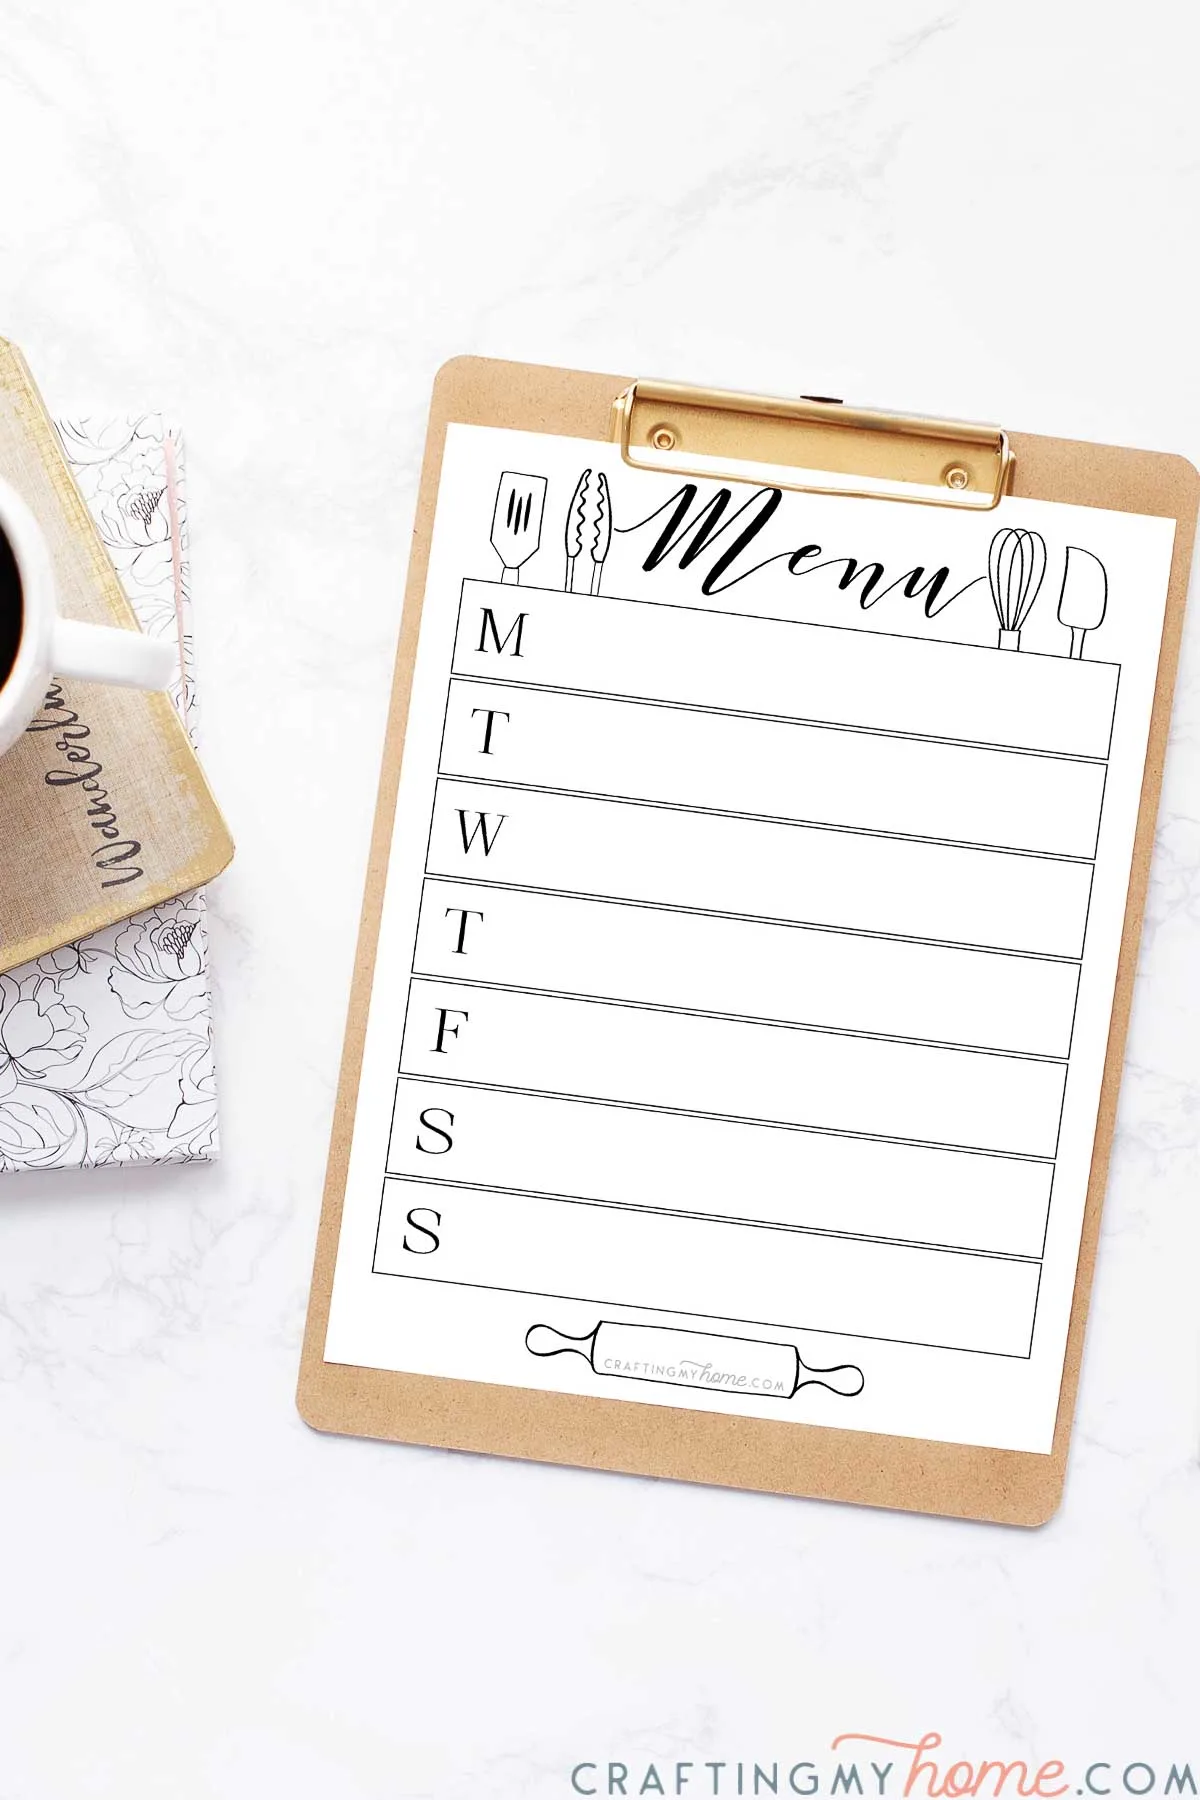 White printable menu board with utensil designs on it clipped to a clipboard next to a planner and cup of coffee. 